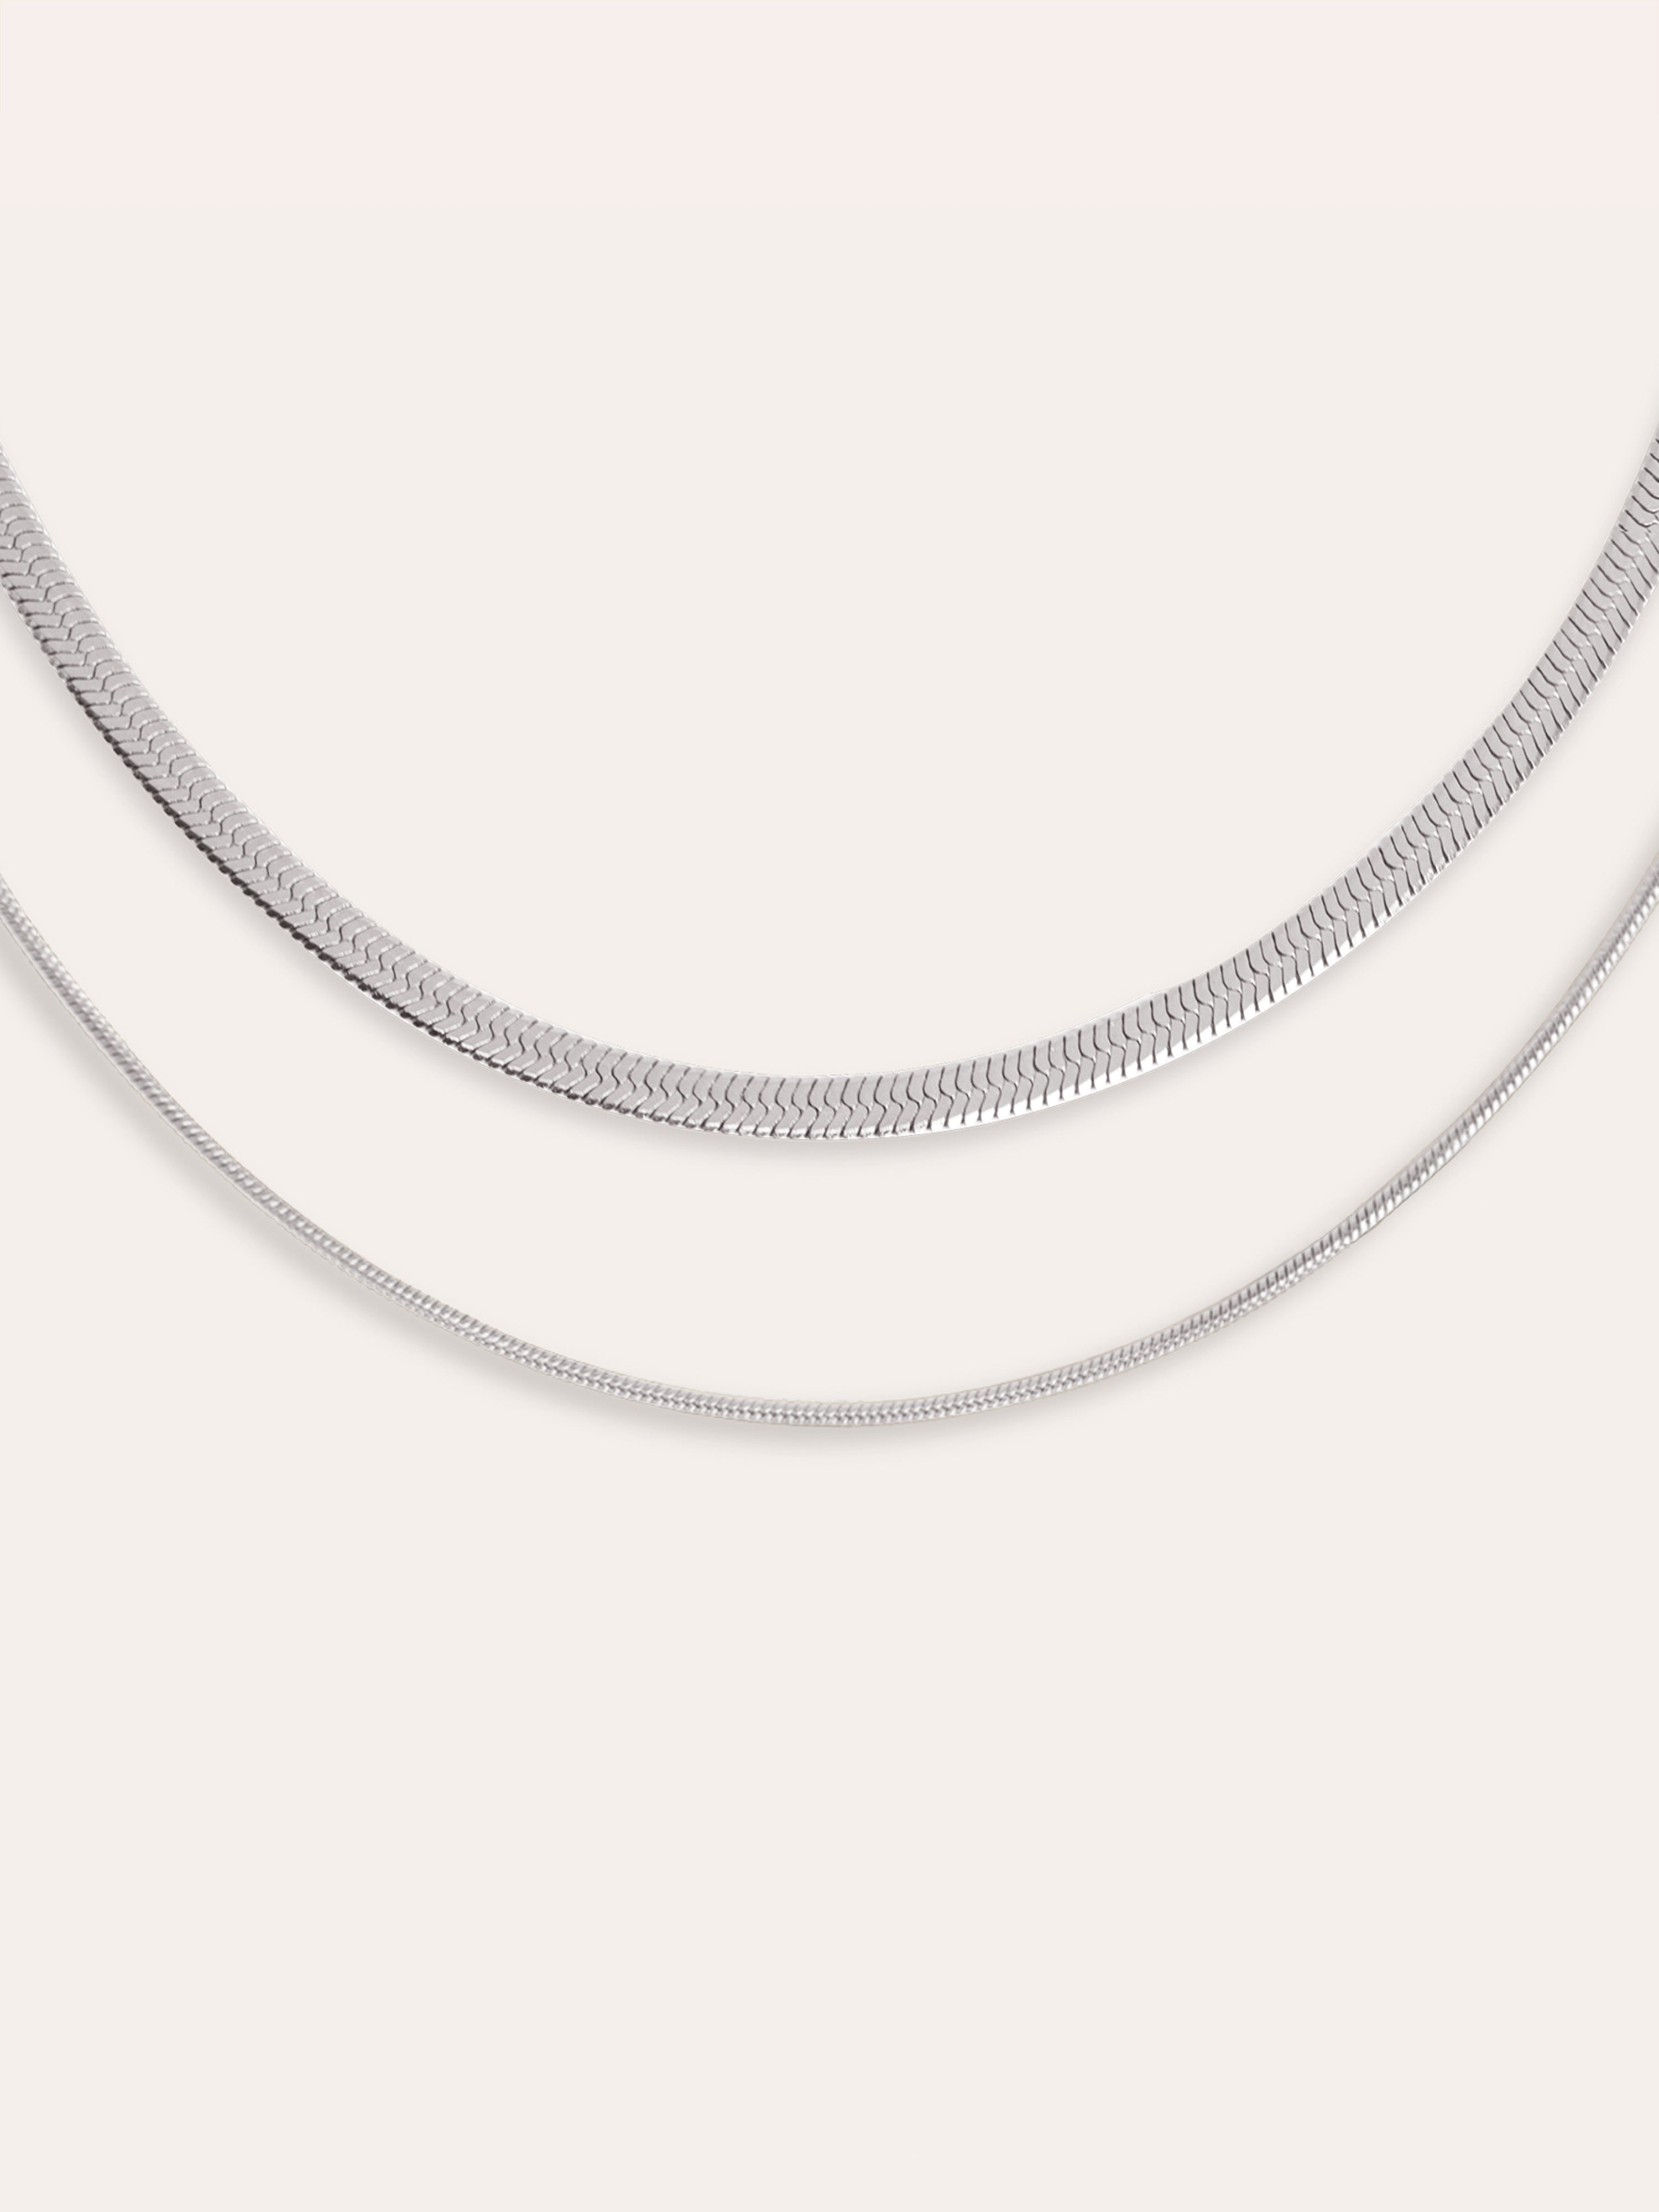 Double Lisse Tail Stainless Steel Necklace